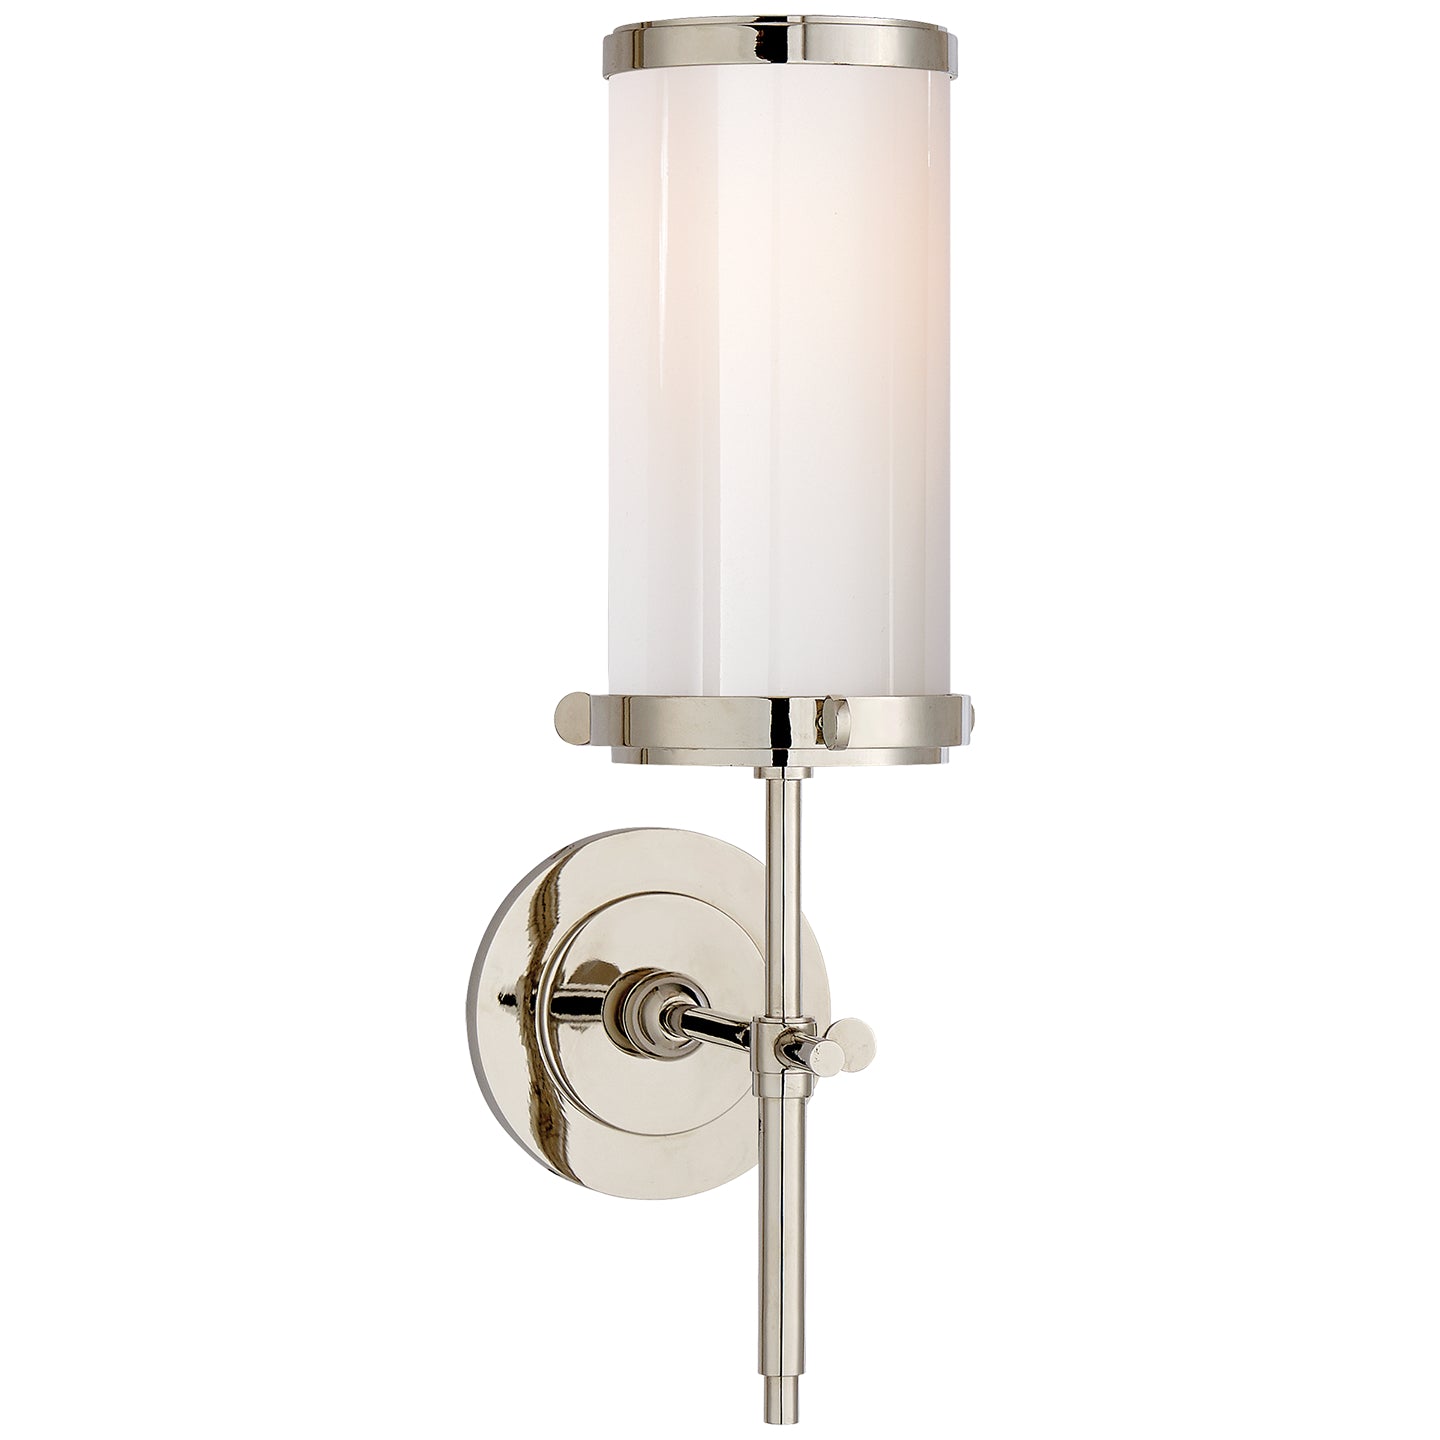 Load image into Gallery viewer, Visual Comfort Signature - TOB 2015PN-WG - One Light Wall Sconce - Bryant Bath - Polished Nickel
